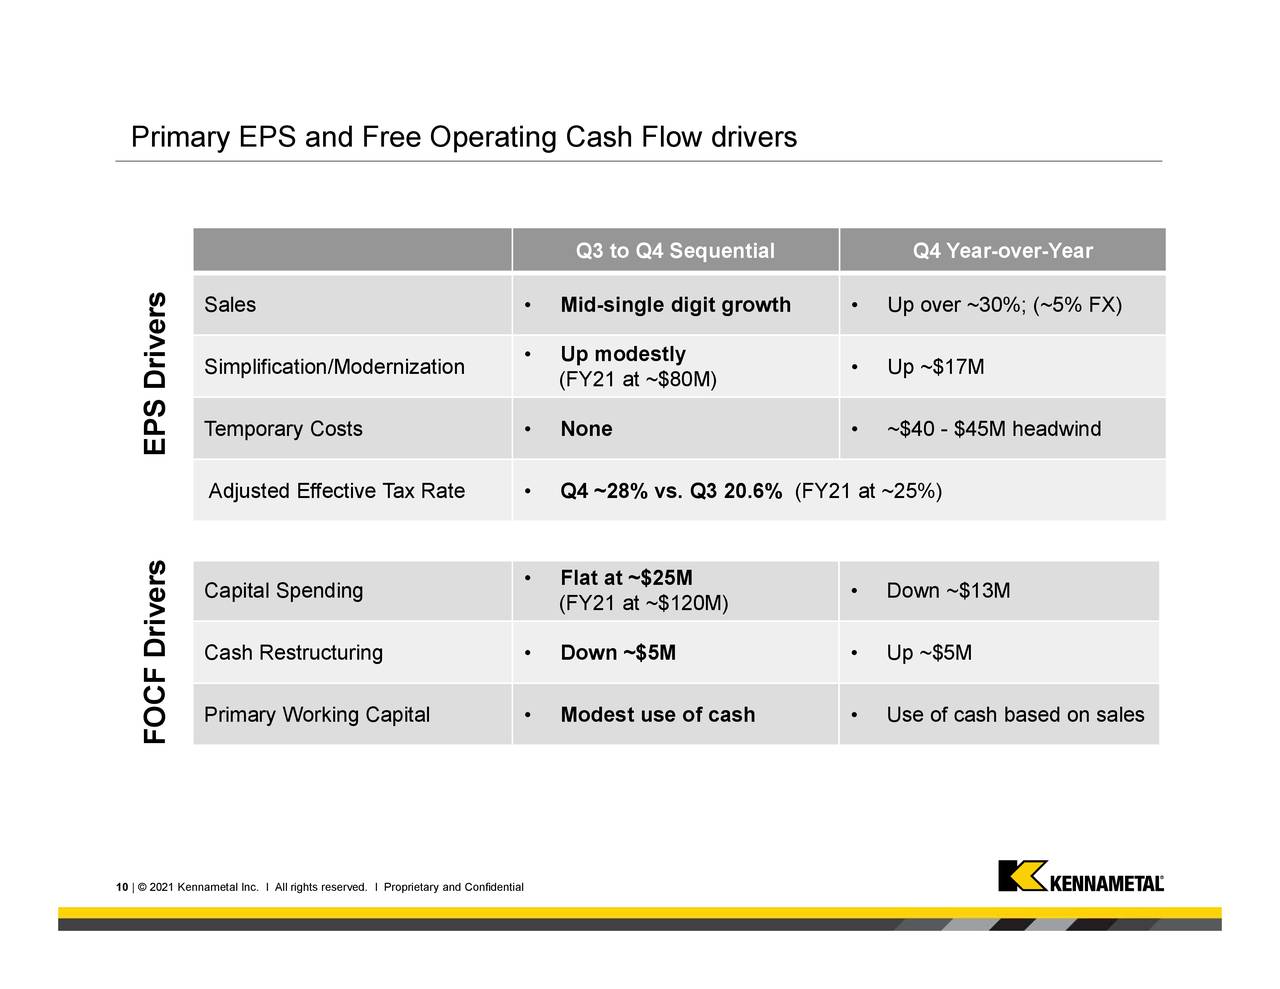 Primary EPS and Free Operating Cash Flow drivers